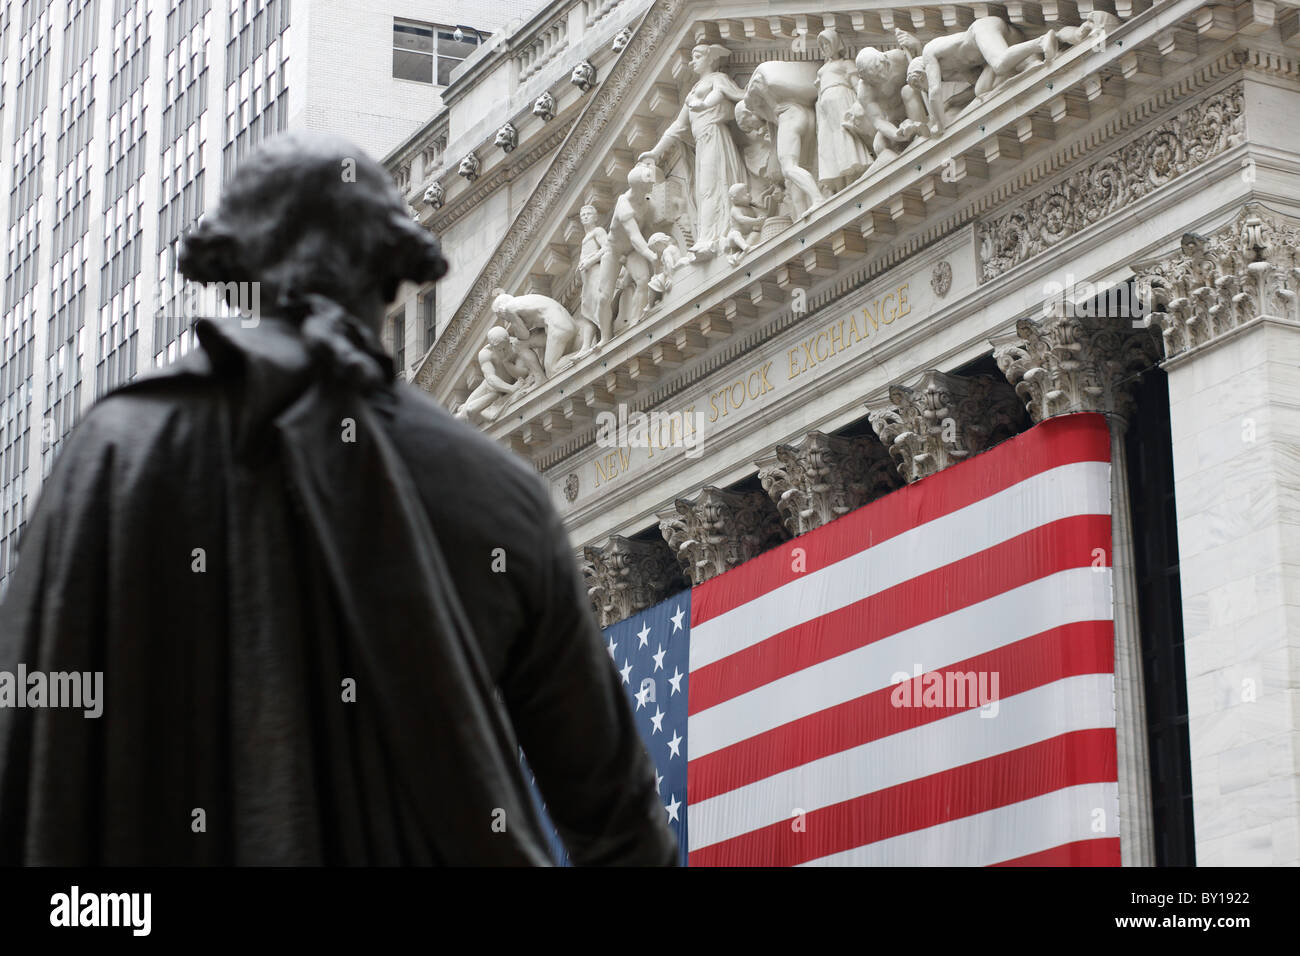 Monument to George Washington in front of NYSE, New York City, United States of America Stock Photo